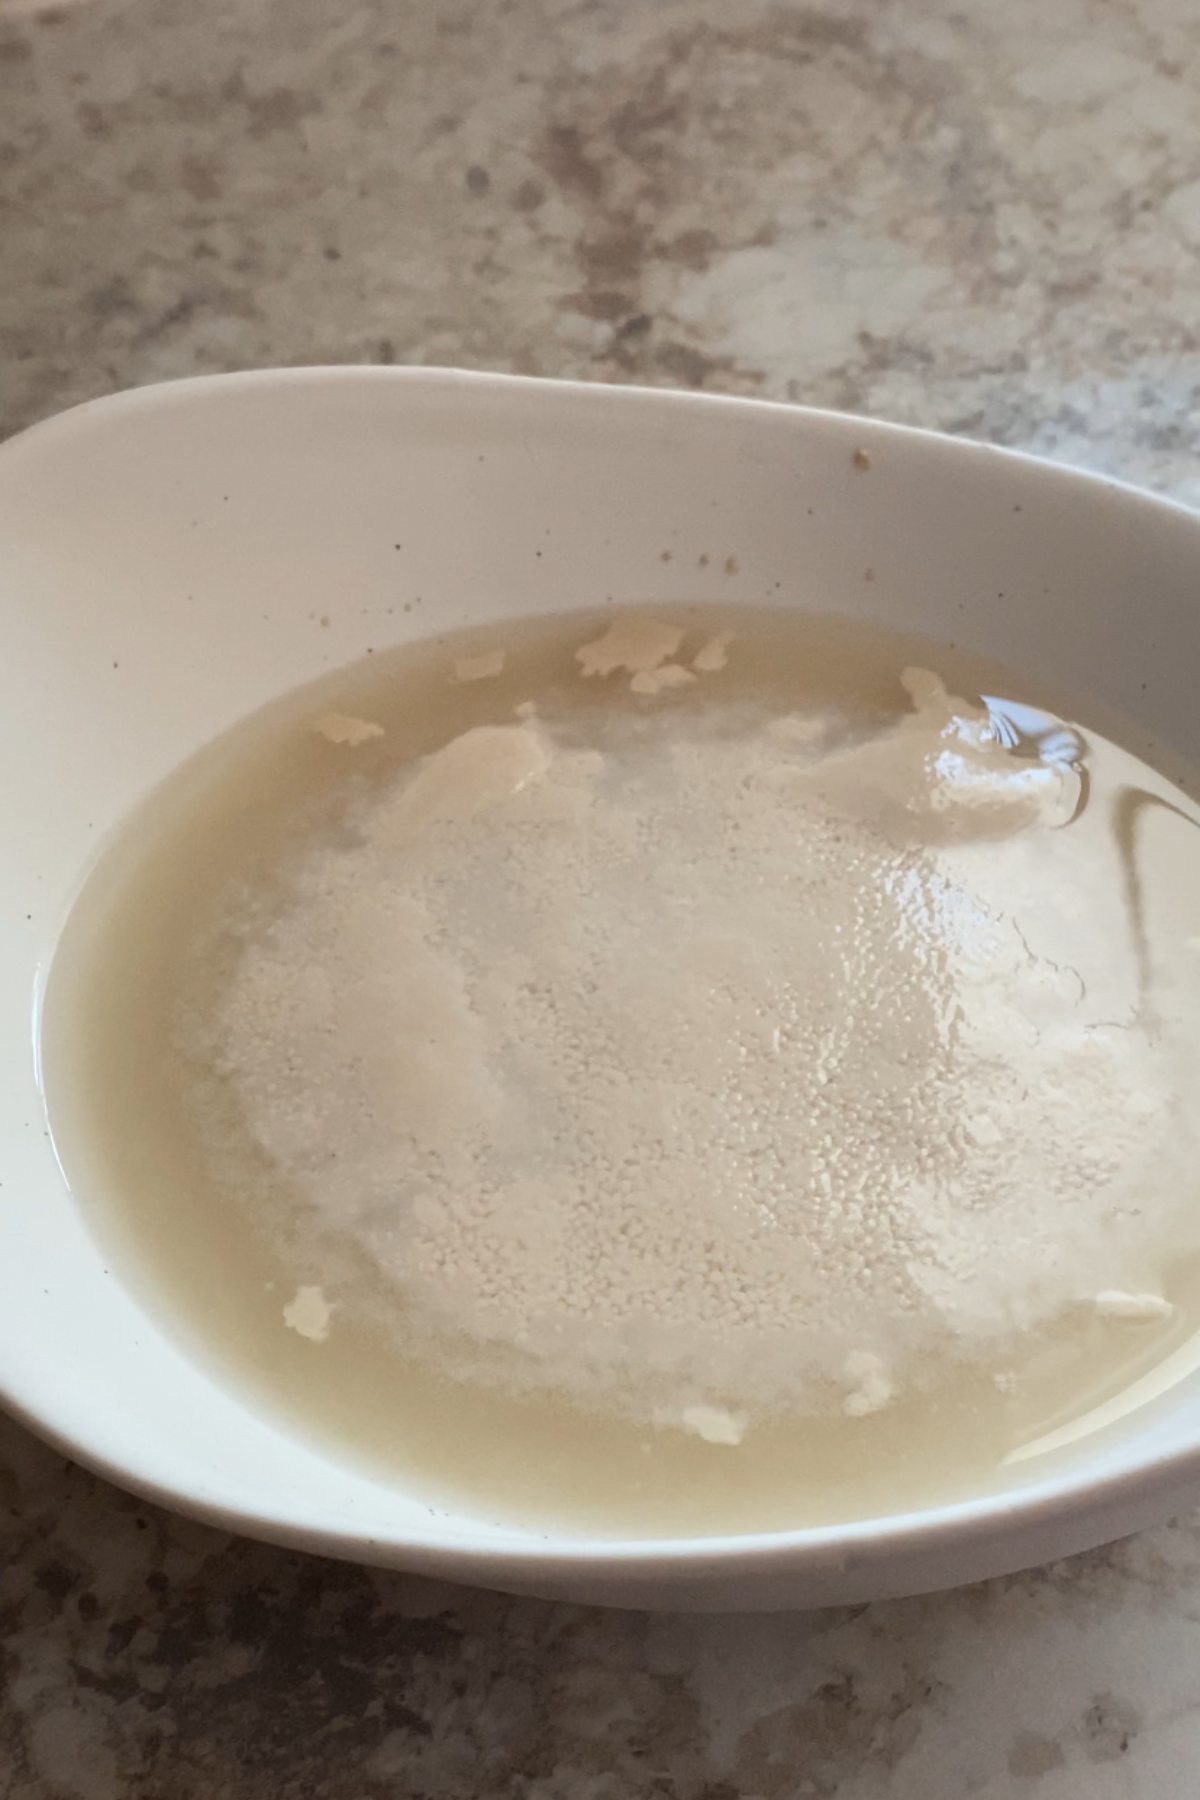 Proofing yeast in a bowl.